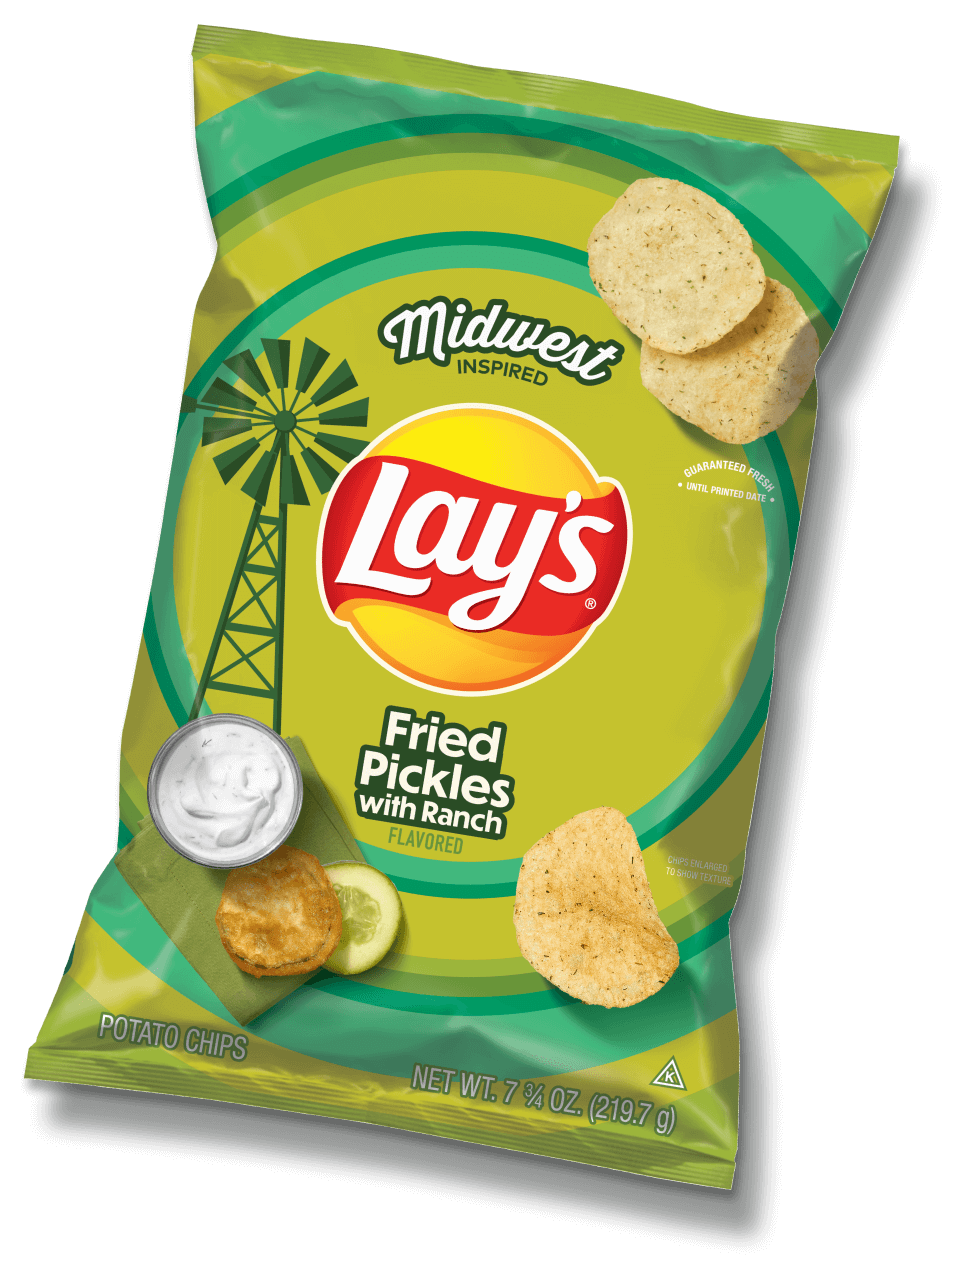 Lay's Fried Pickles with Ranch chips bag image.